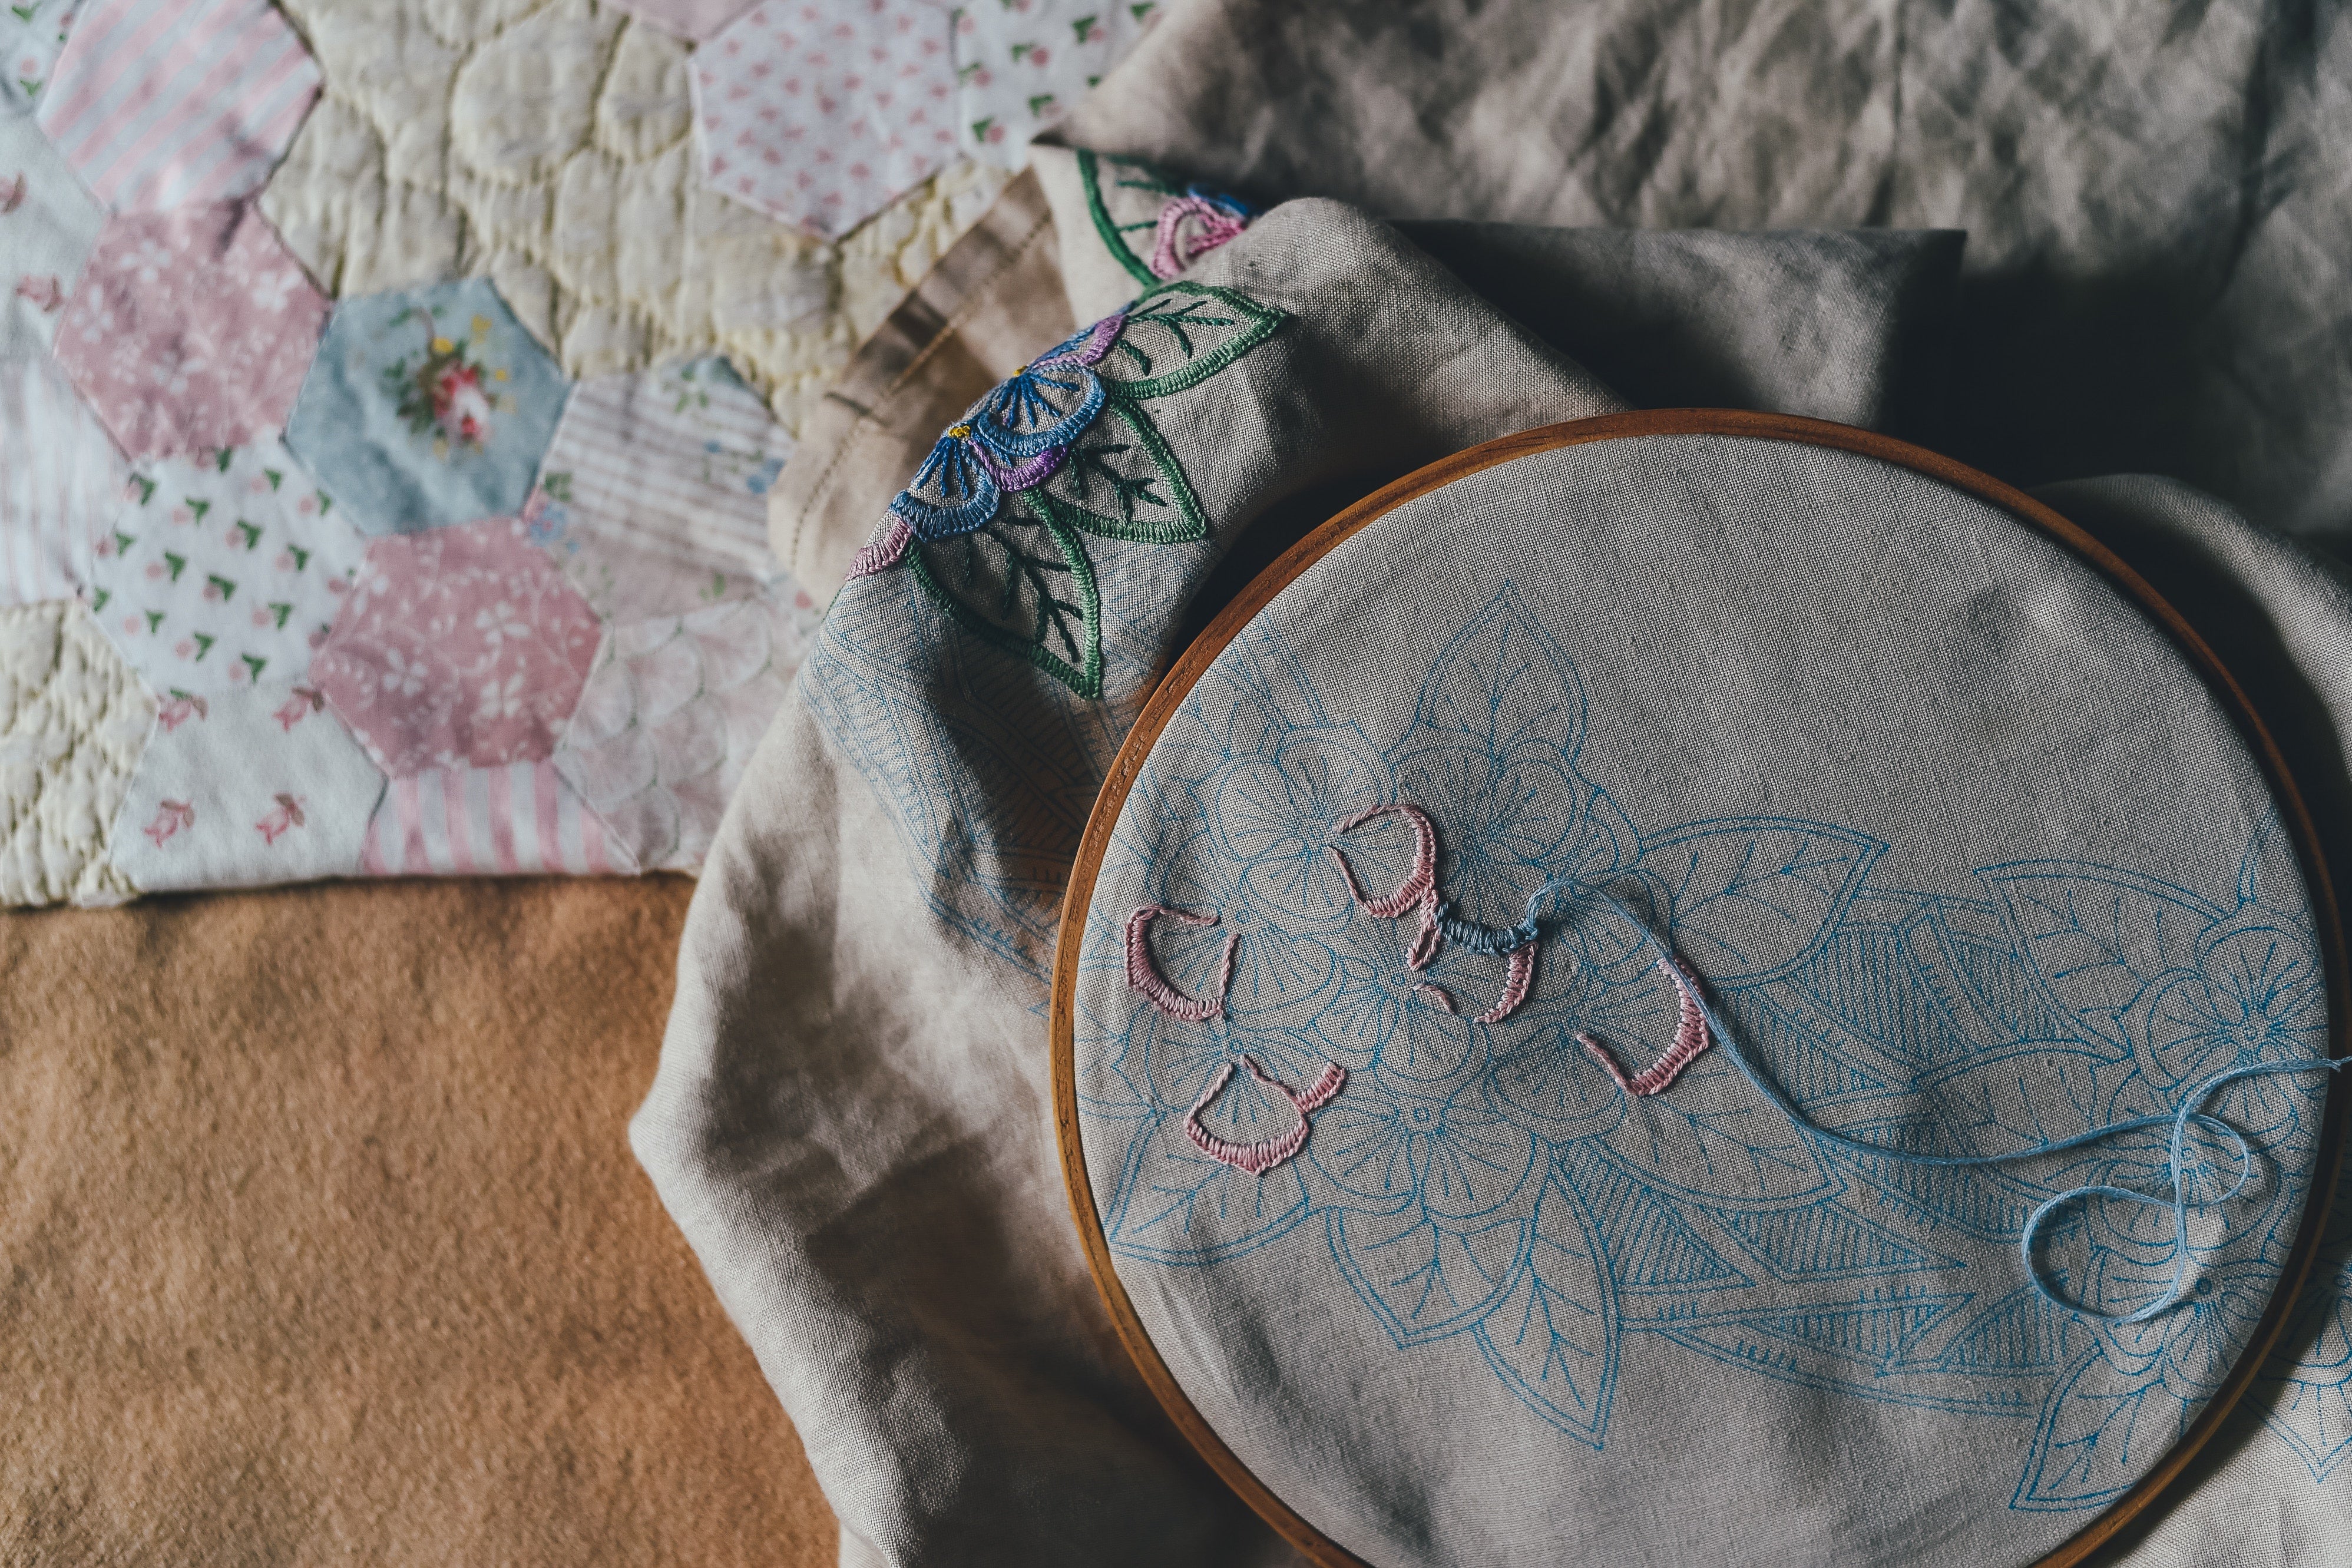 The beginning of an embroidered design lies inside a wooden hoop. A quilt lies in the background.